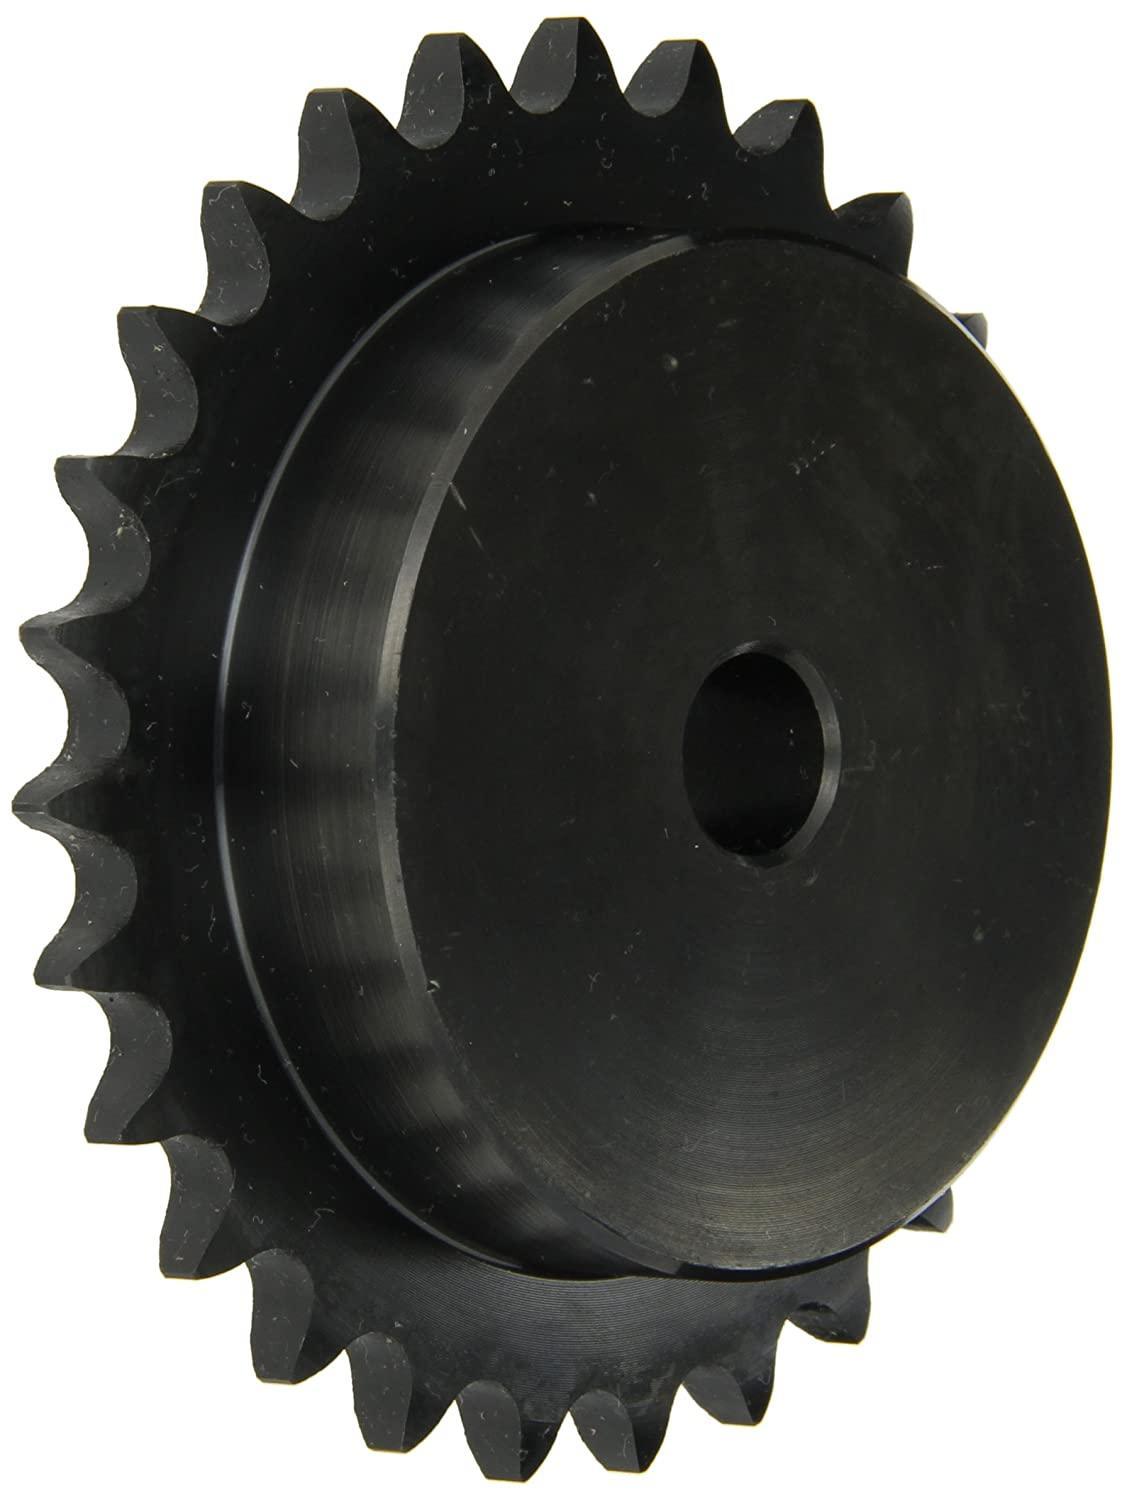 100B29 Roller Chain Sprocket With Stock Bore - Forces Inc